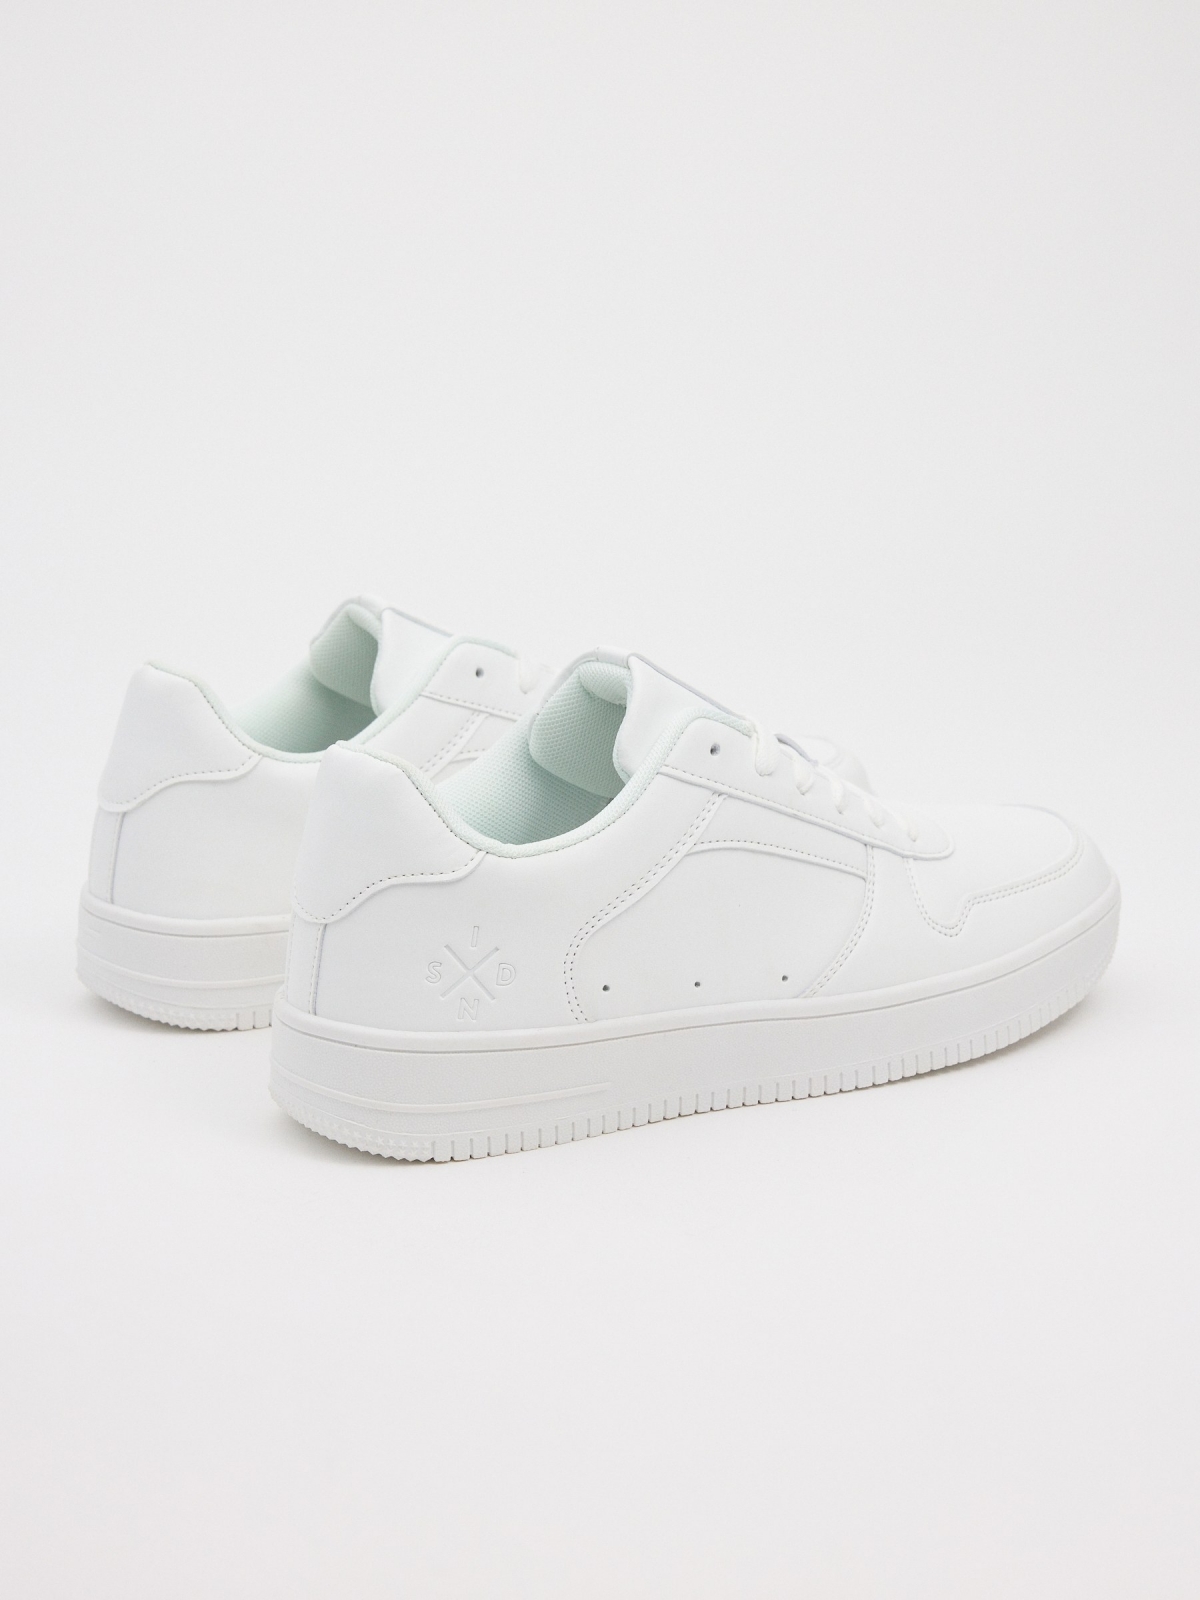 Basic casual combined sneaker white 45º back view